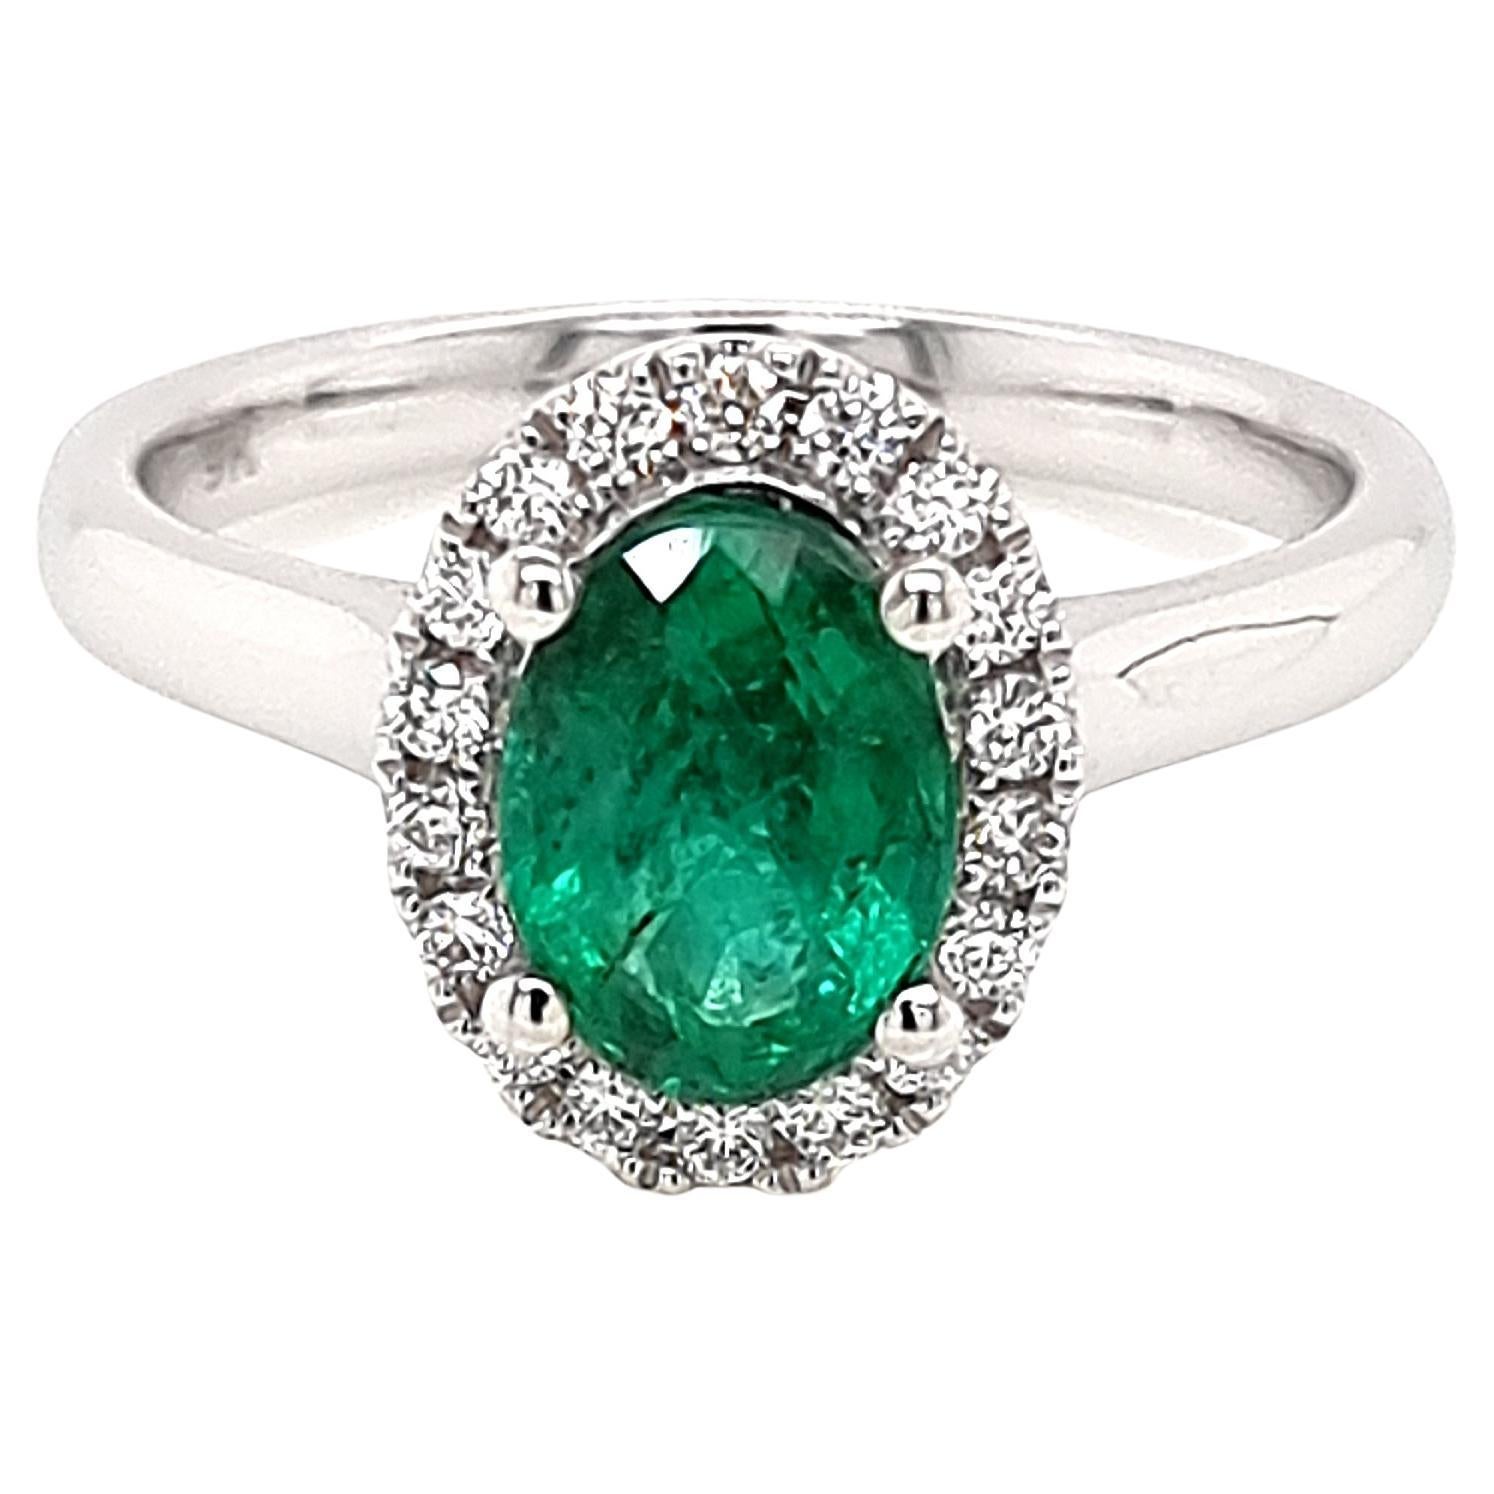 Zambian Emerald Halo Ring with White Diamonds made in 9K White Gold For Sale